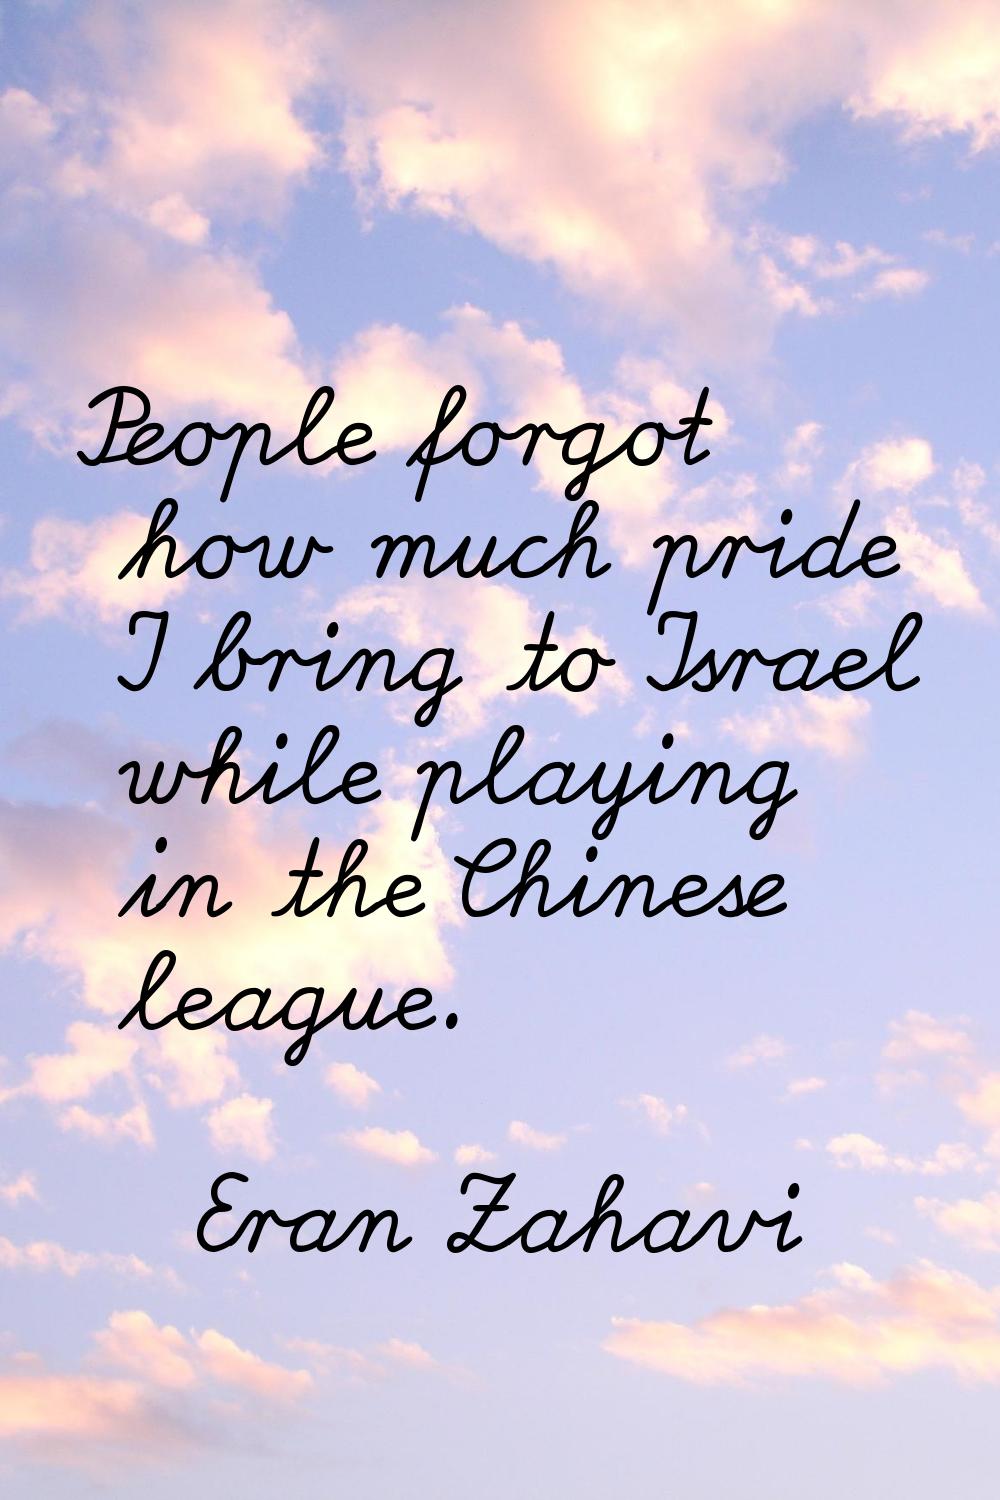 People forgot how much pride I bring to Israel while playing in the Chinese league.